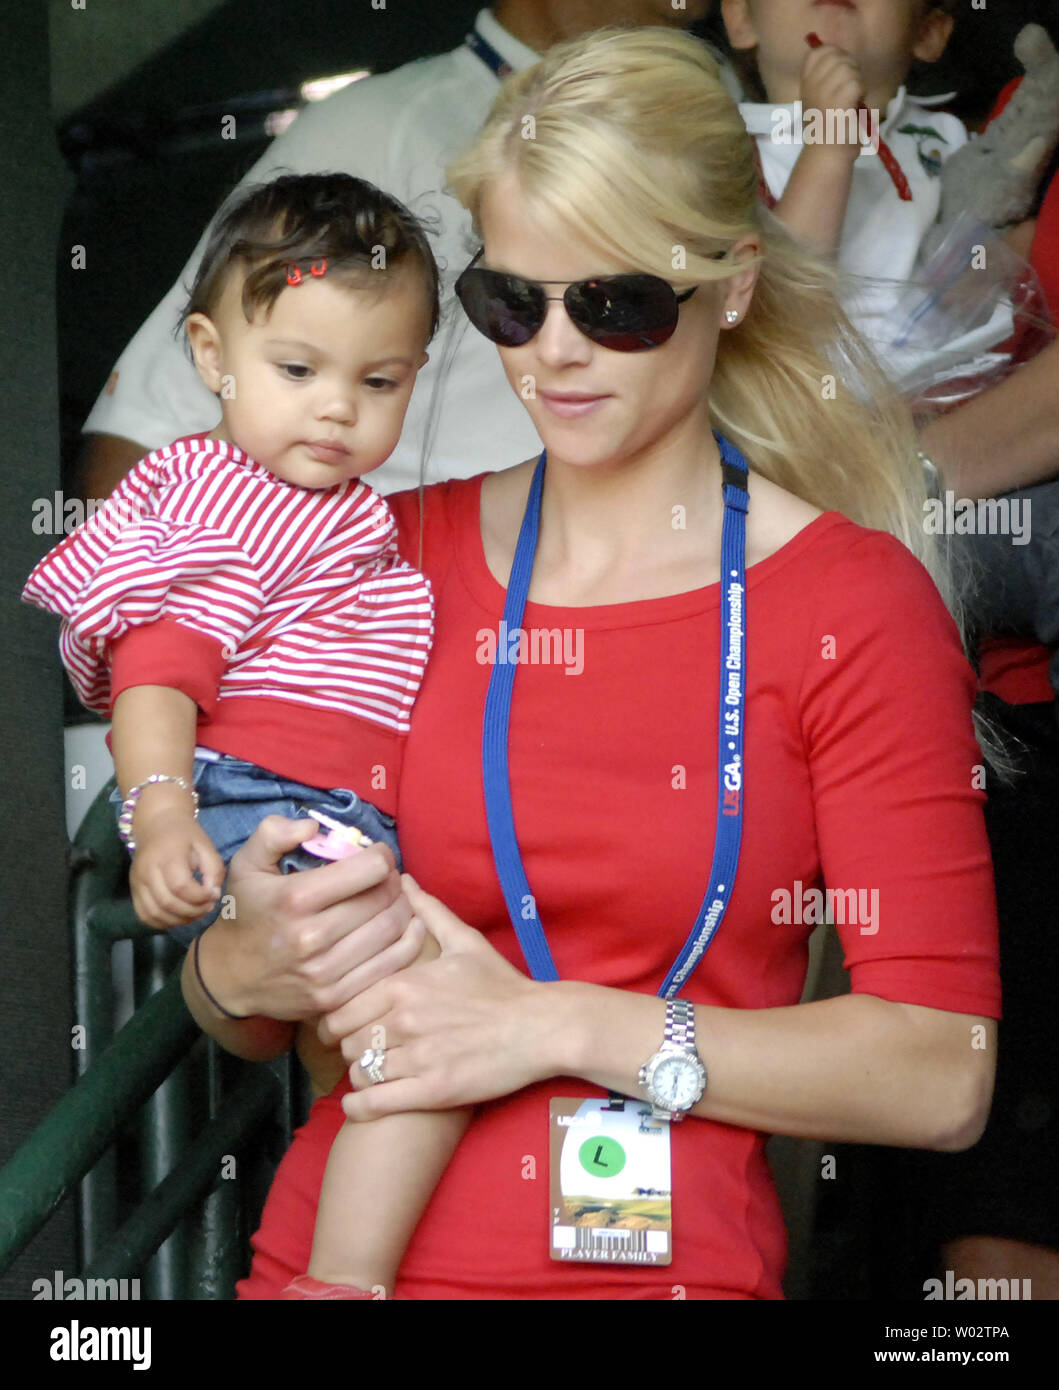 Tiger Woods's wife Elin Nordegren carries their daughter Sam as they watch Woods putt on the 18th green during the final round of the US Open at Torrey Pines Golf Course in San Diego on June 15, 2008. Woods finished his round tied for first with Rocco Mediate. A playoff round between Woods and Mediate will be held tomorrow. (UPI Photo/Earl Cryer) Stock Photo